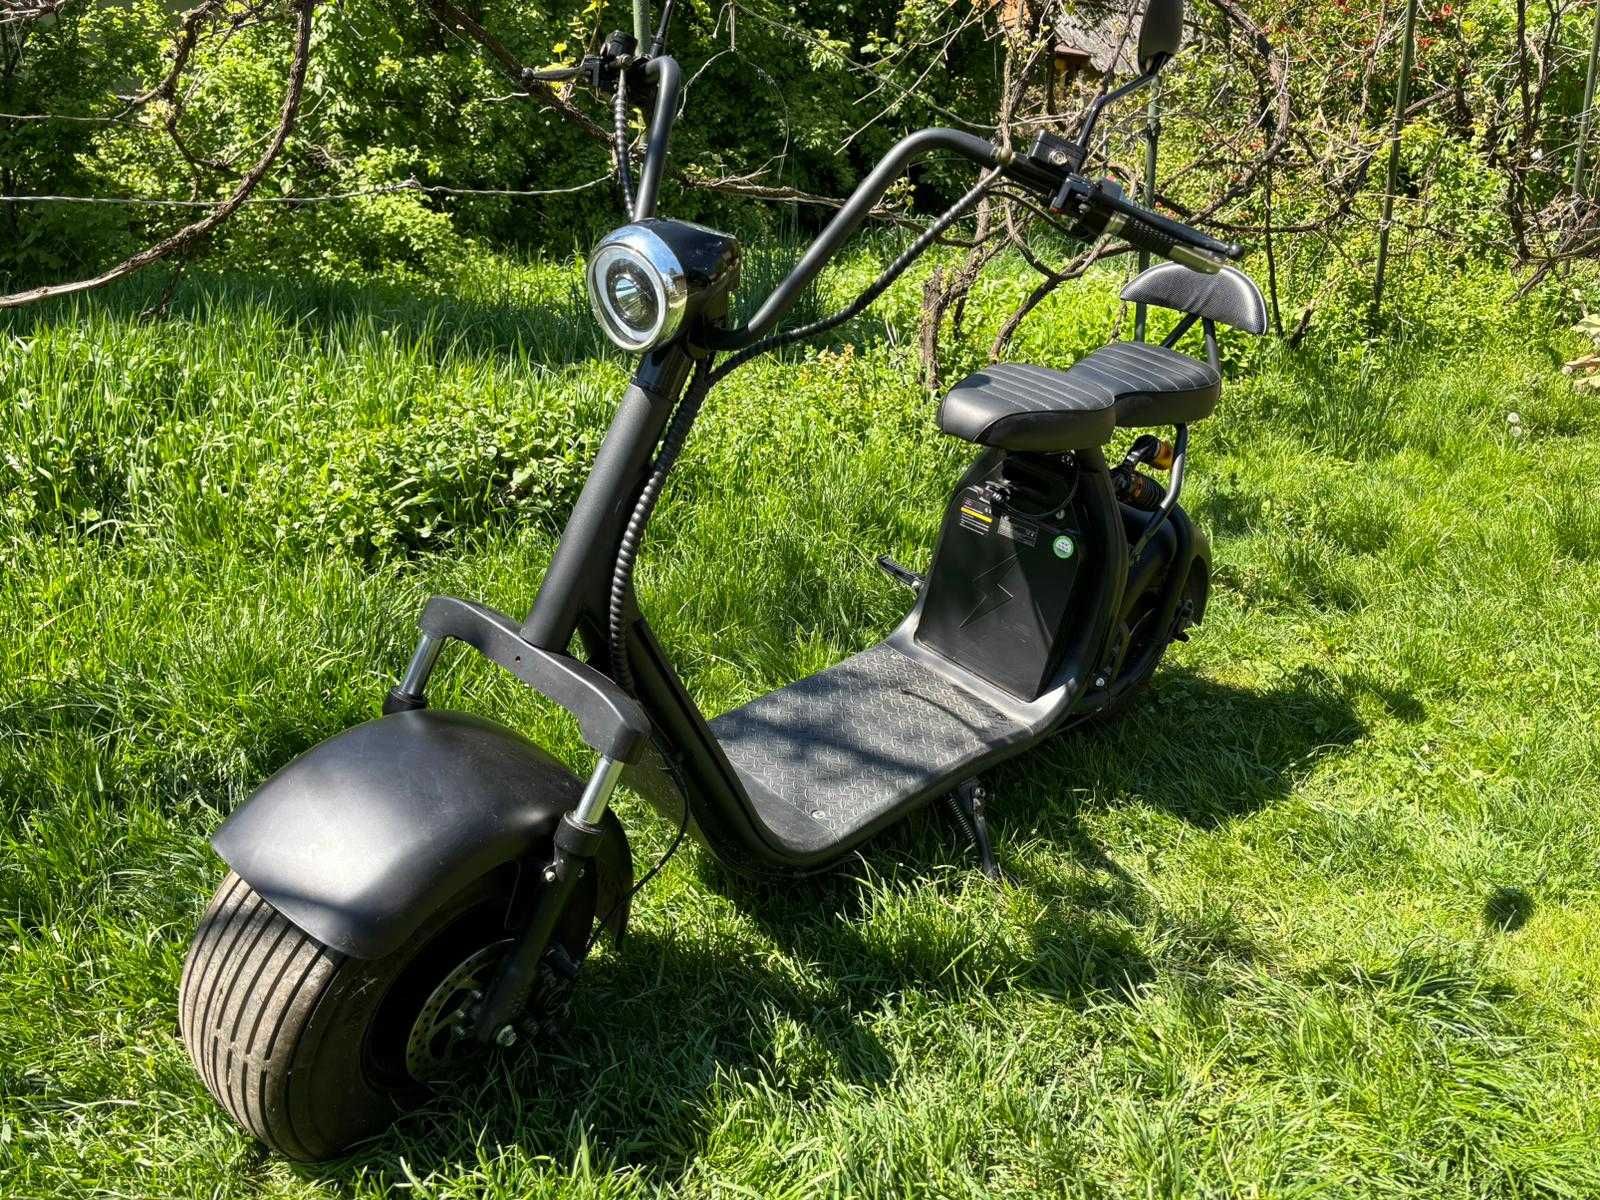 Scooter electric